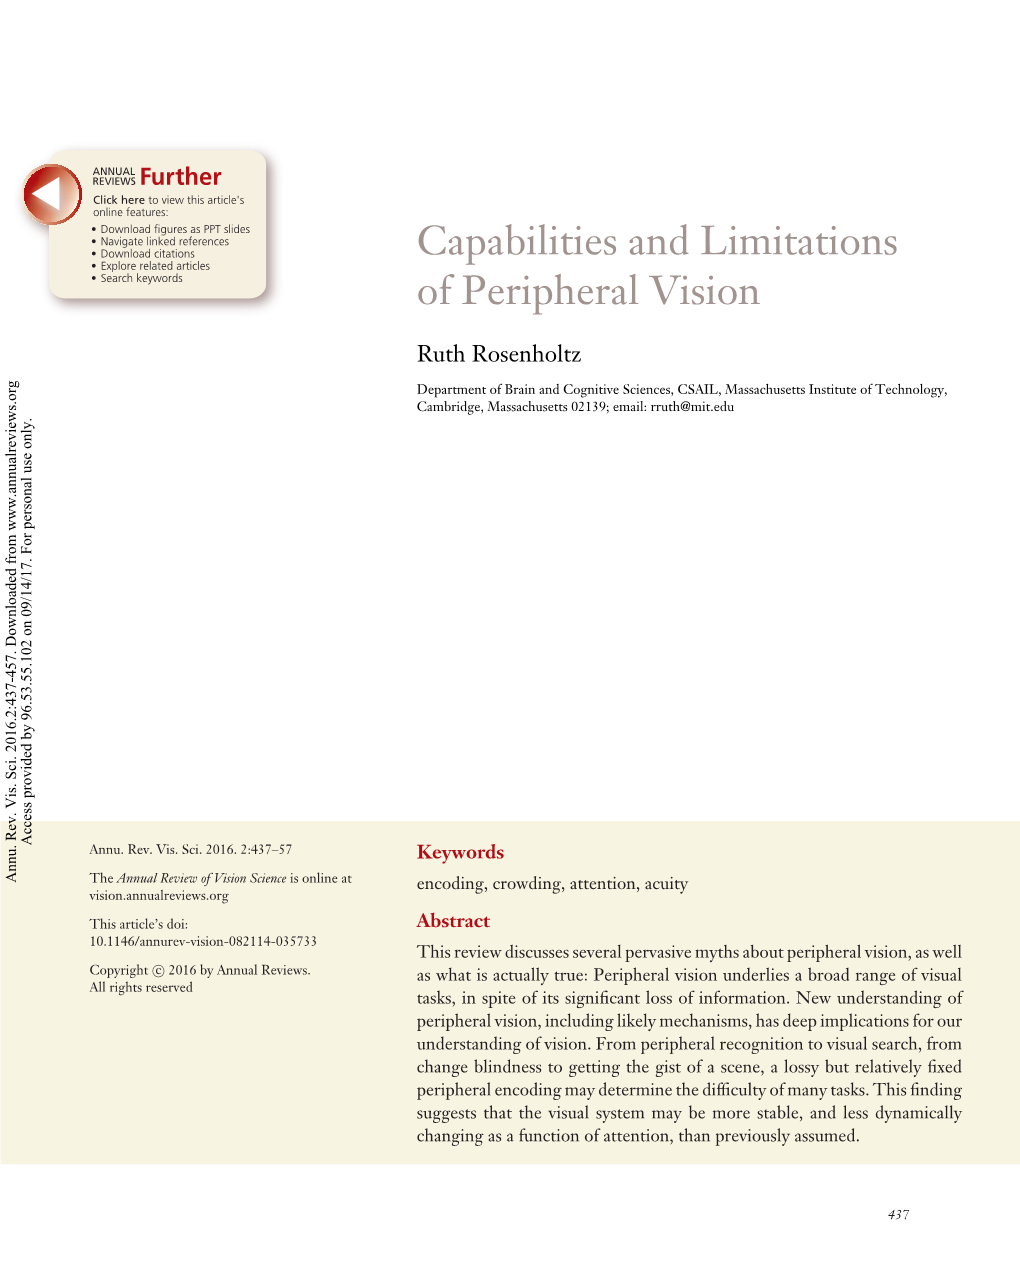 Capabilities and Limitations of Peripheral Vision